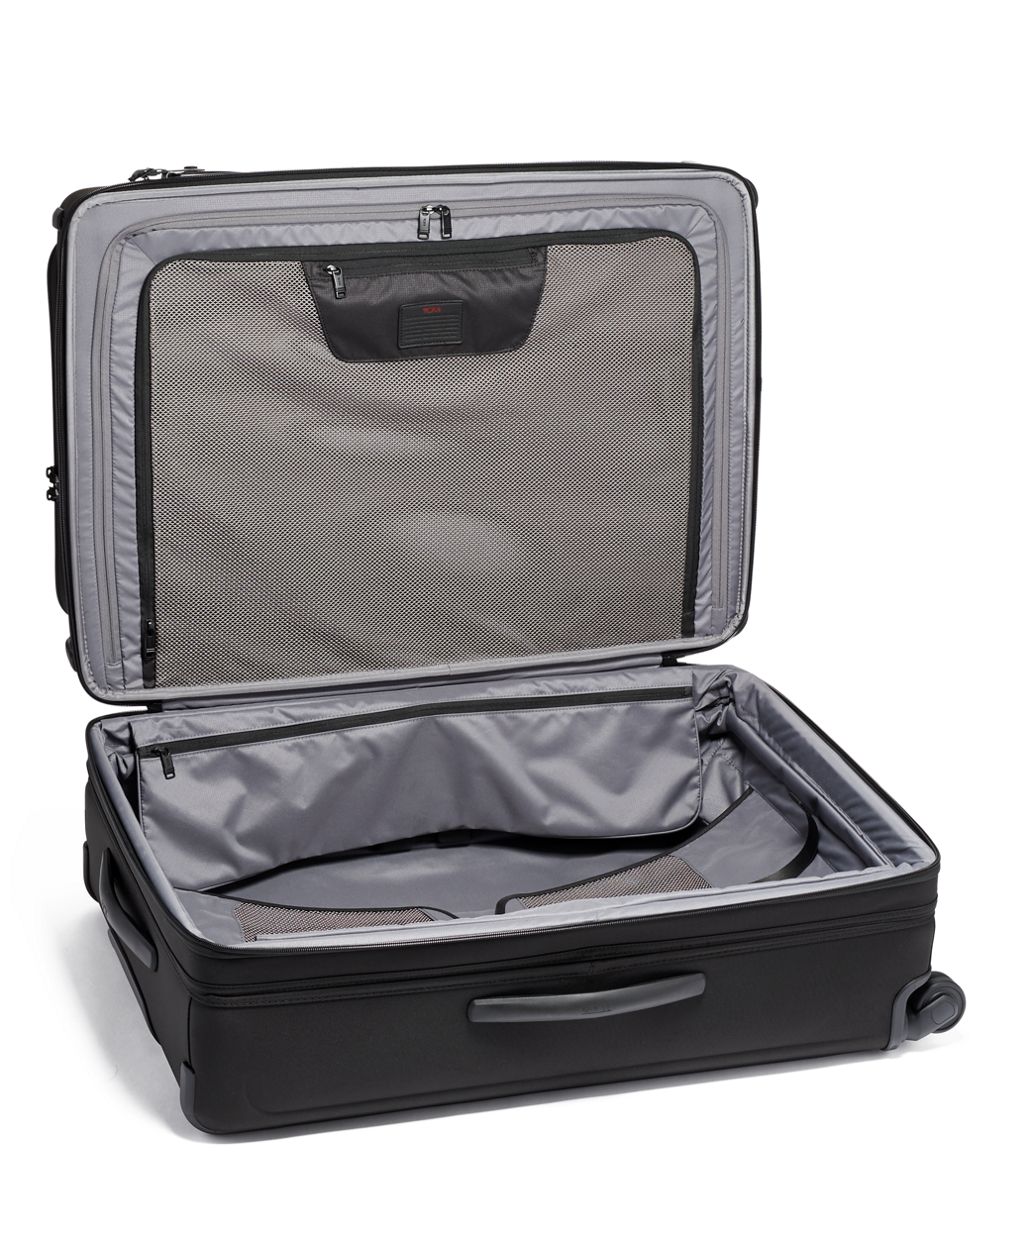 Extended Trip Expandable 4 Wheeled Packing Case | Tumi US